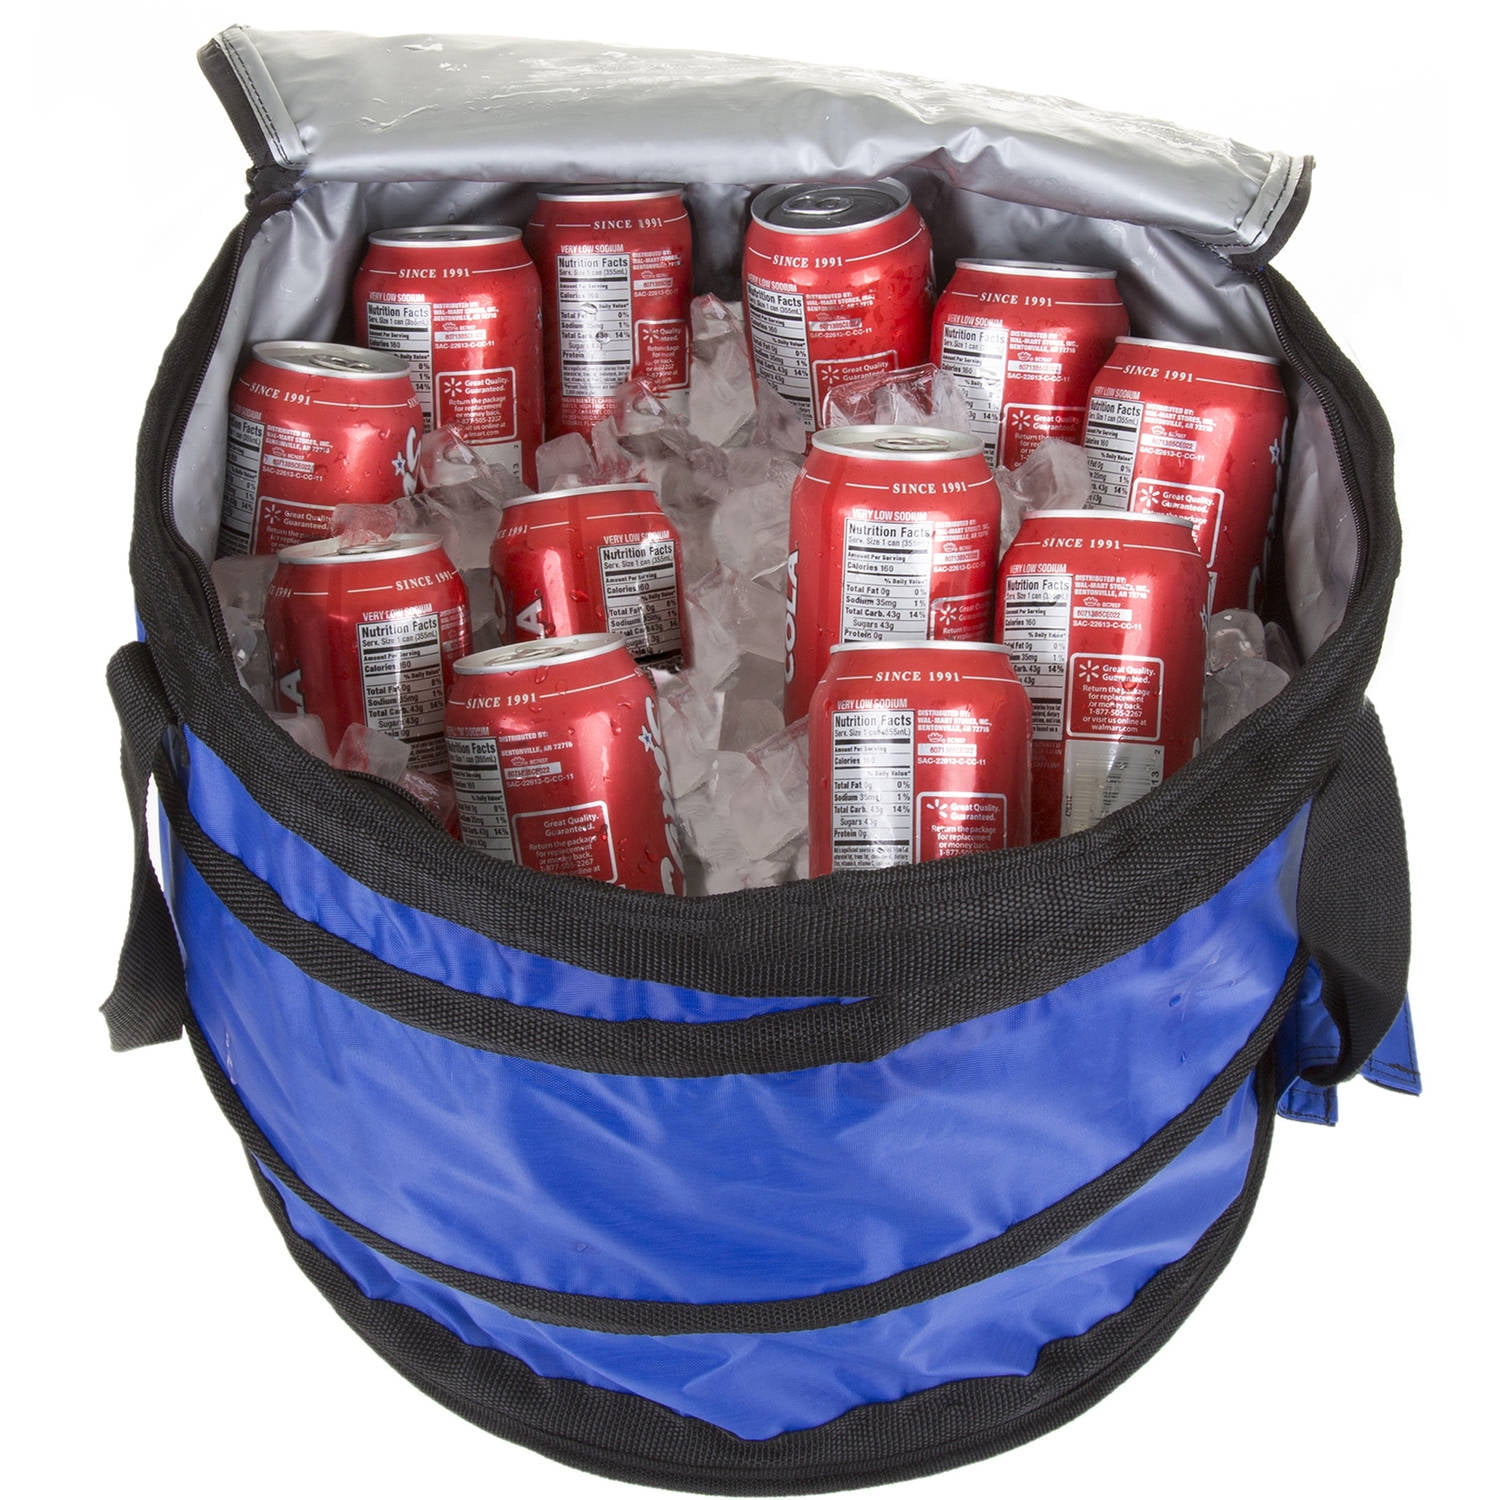 MODELO BEER SOFTSIDE INSULATED ROLLING BEVERAGE COOLER BAG + 24pc SWAG LOT  NEW